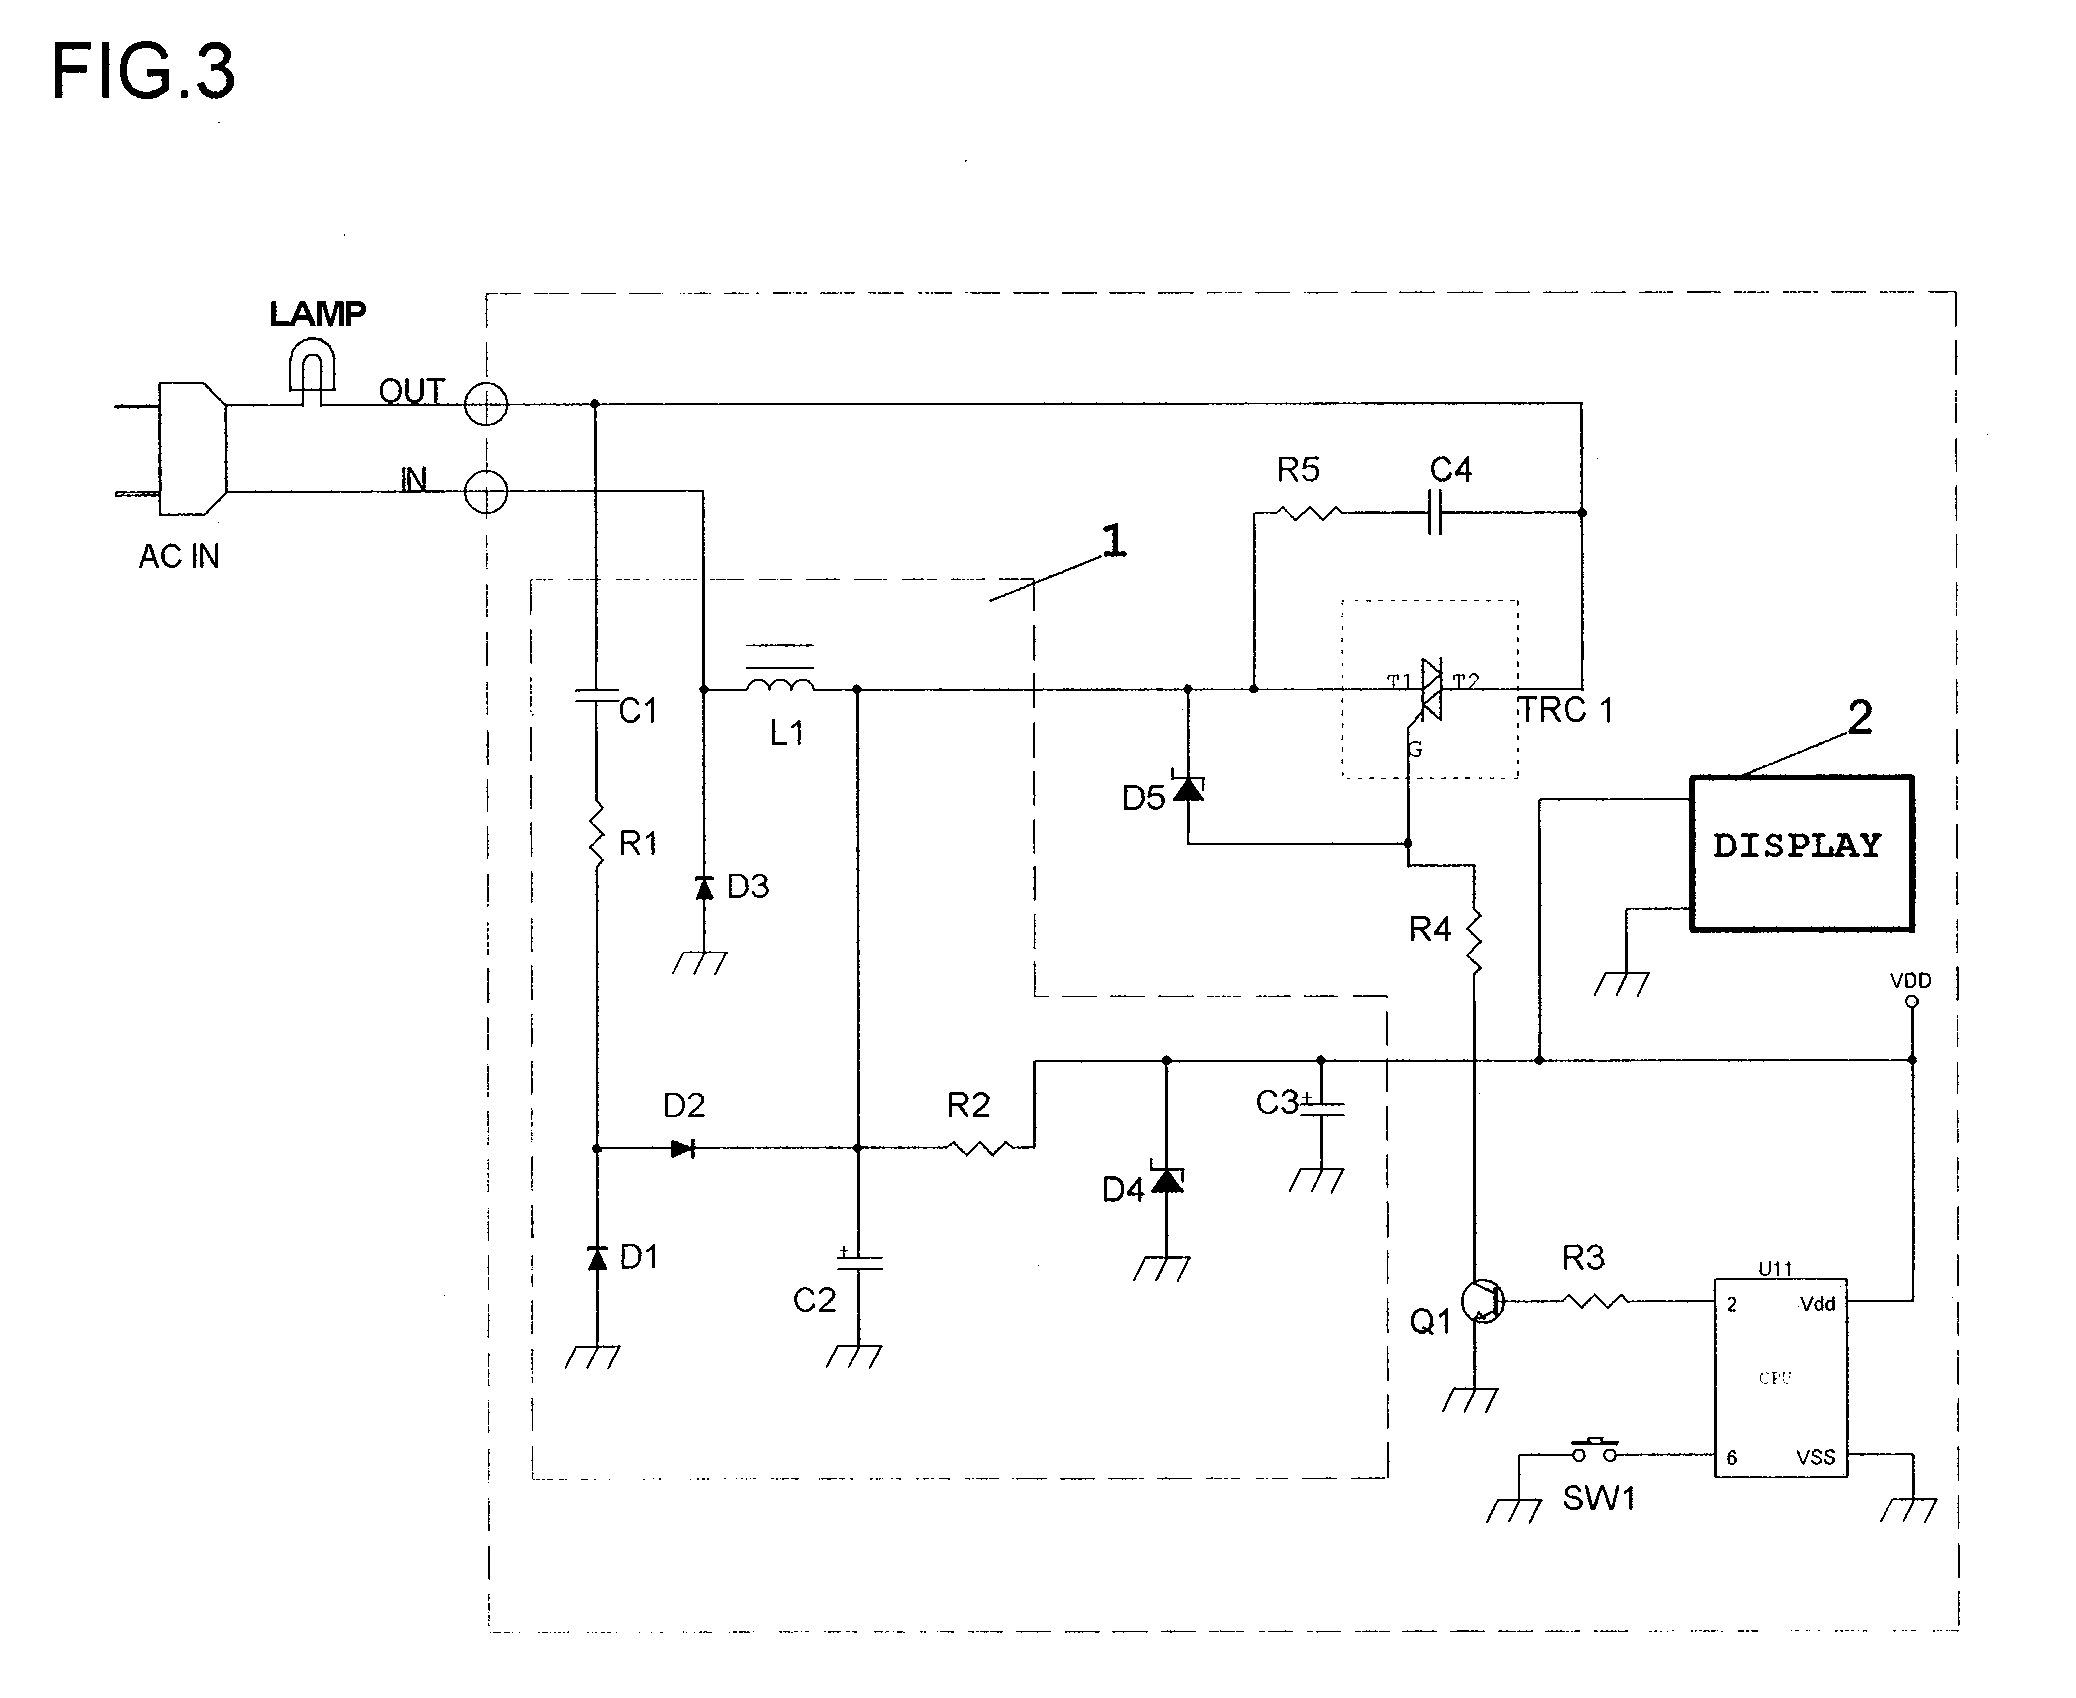 Power supply circuit for the wall mounted electronic switch